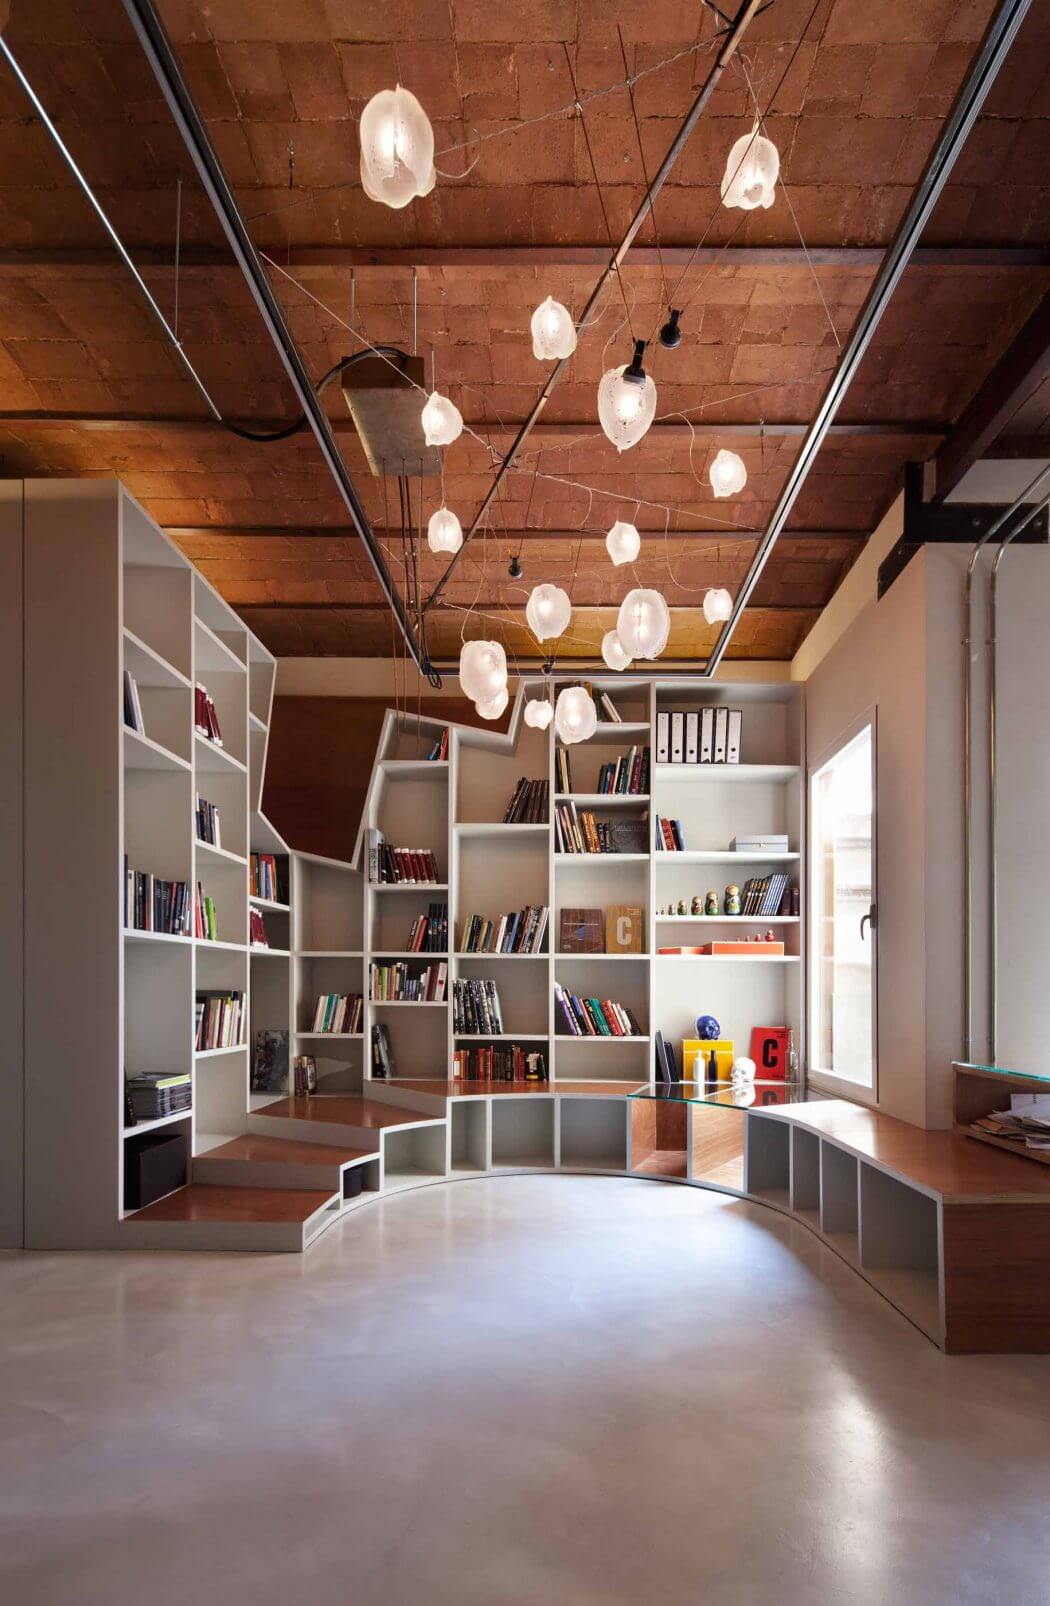 A cozy library space with intricate wooden ceiling, built-in bookshelves, and modern lighting.